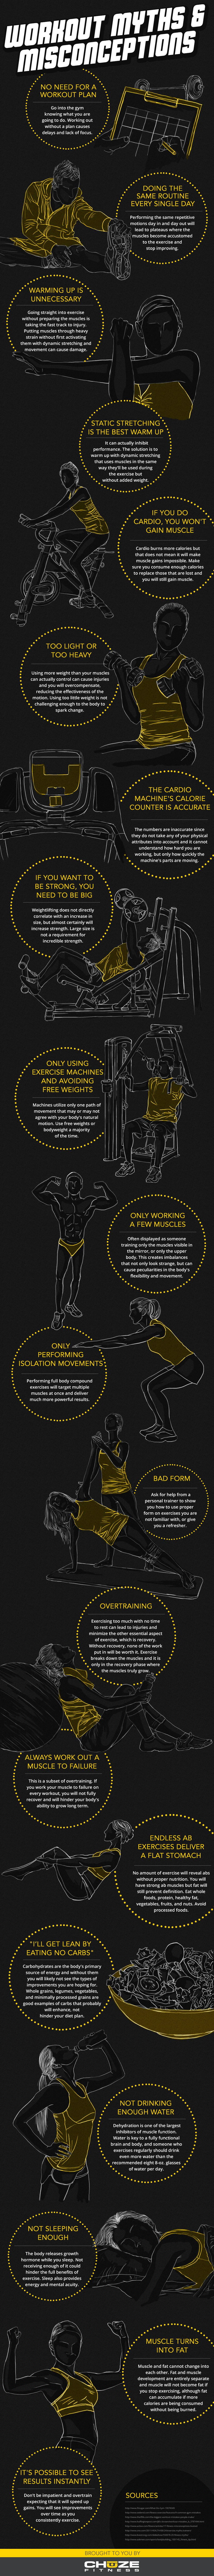 Workout Myths and Misconceptions